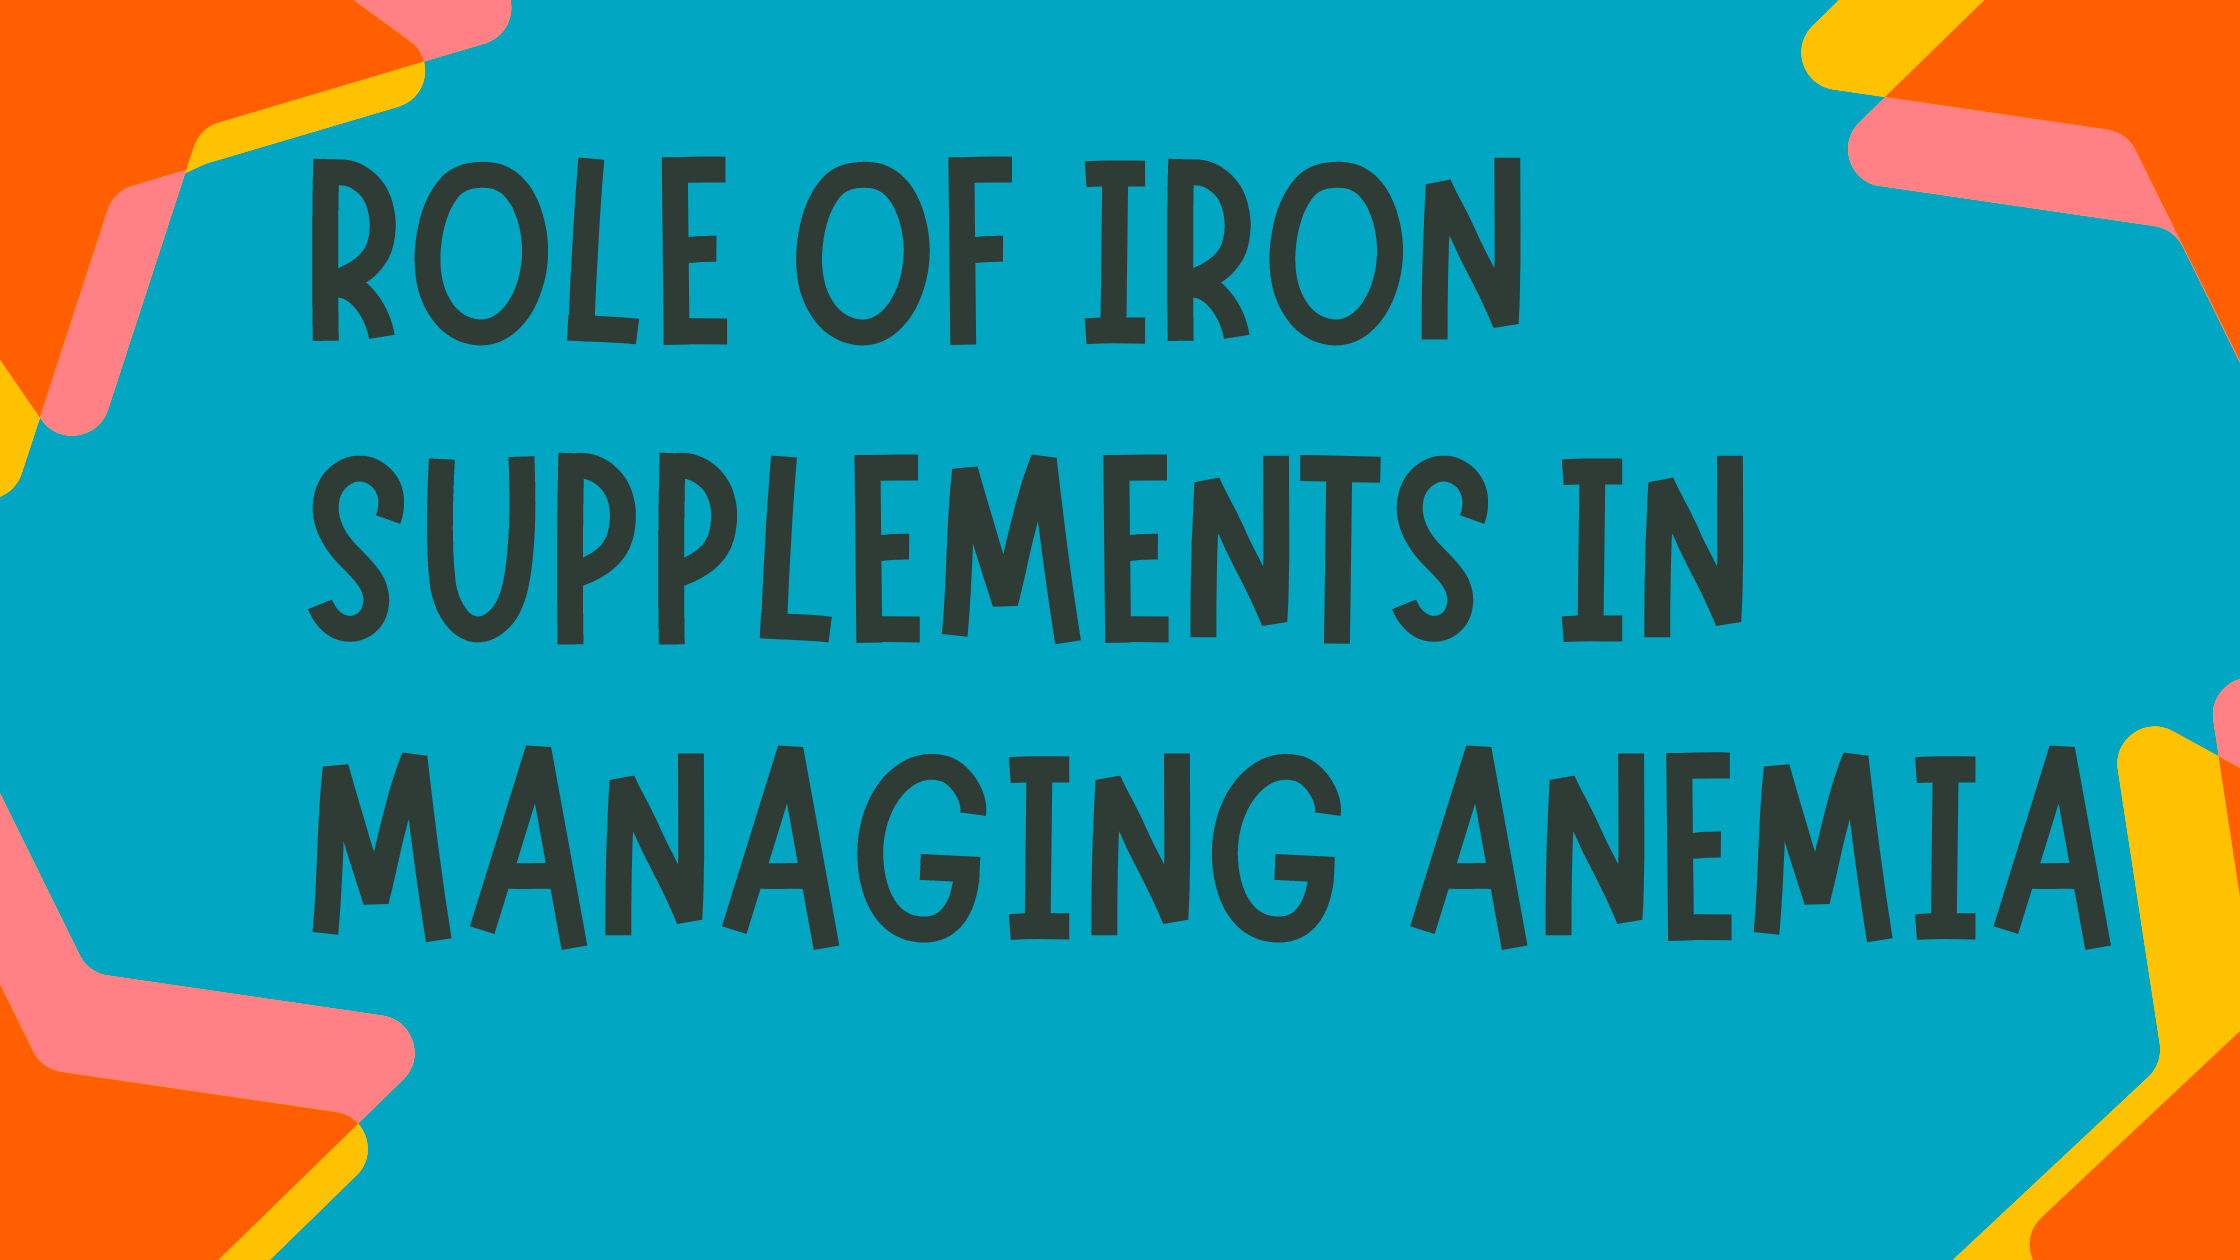 The Role of Iron Supplements in Managing Anemia